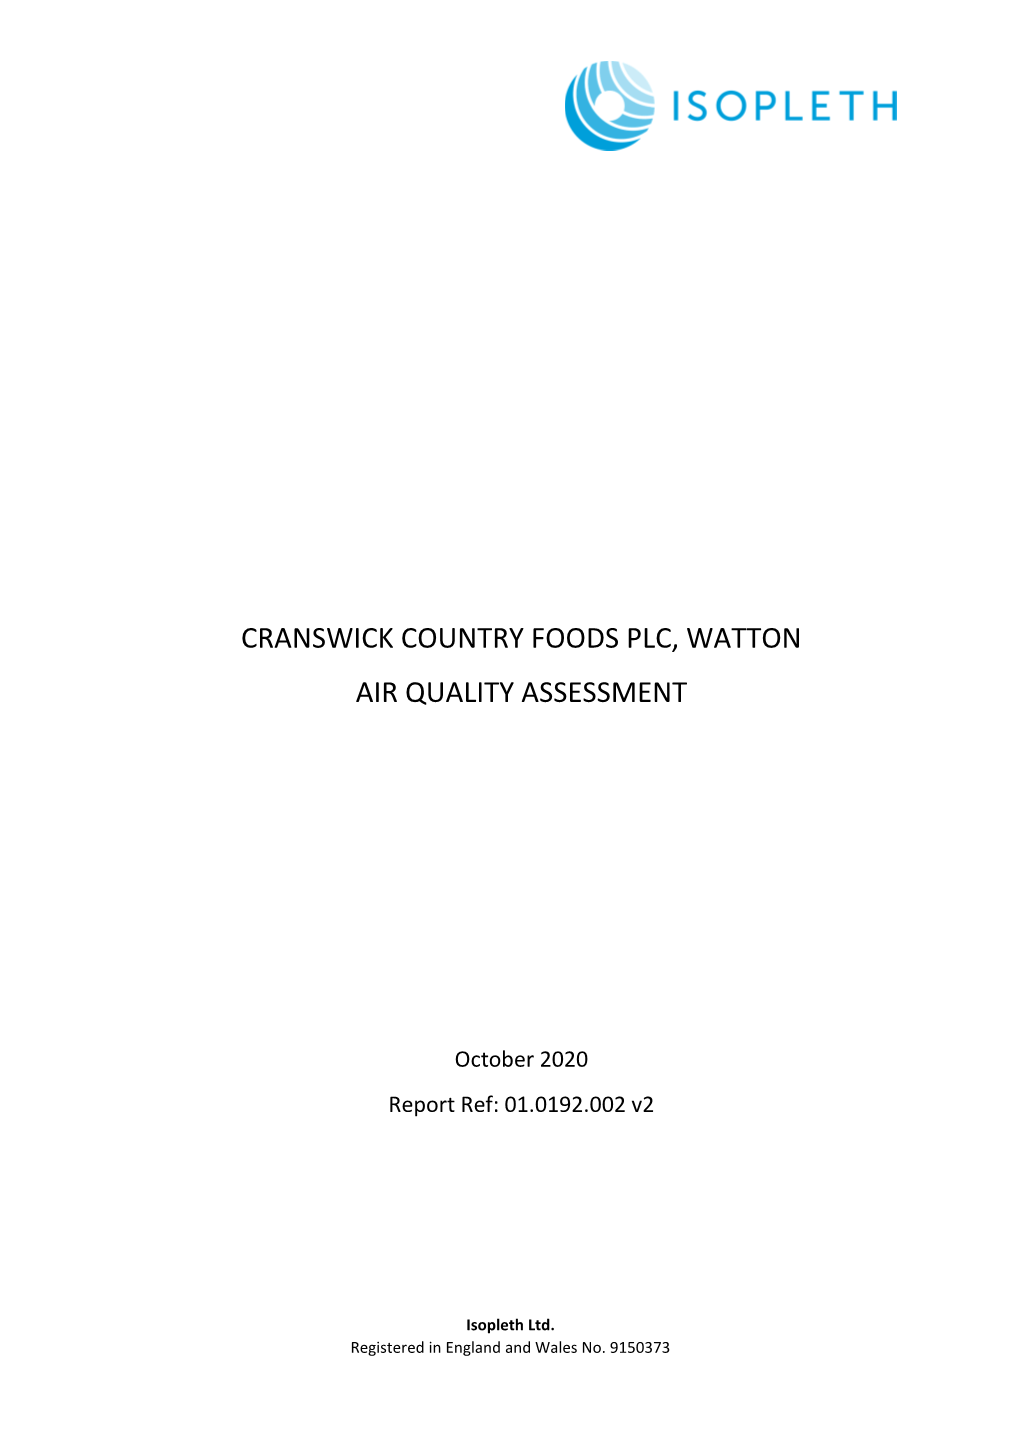 Cranswick Country Foods Plc, Watton Air Quality Assessment